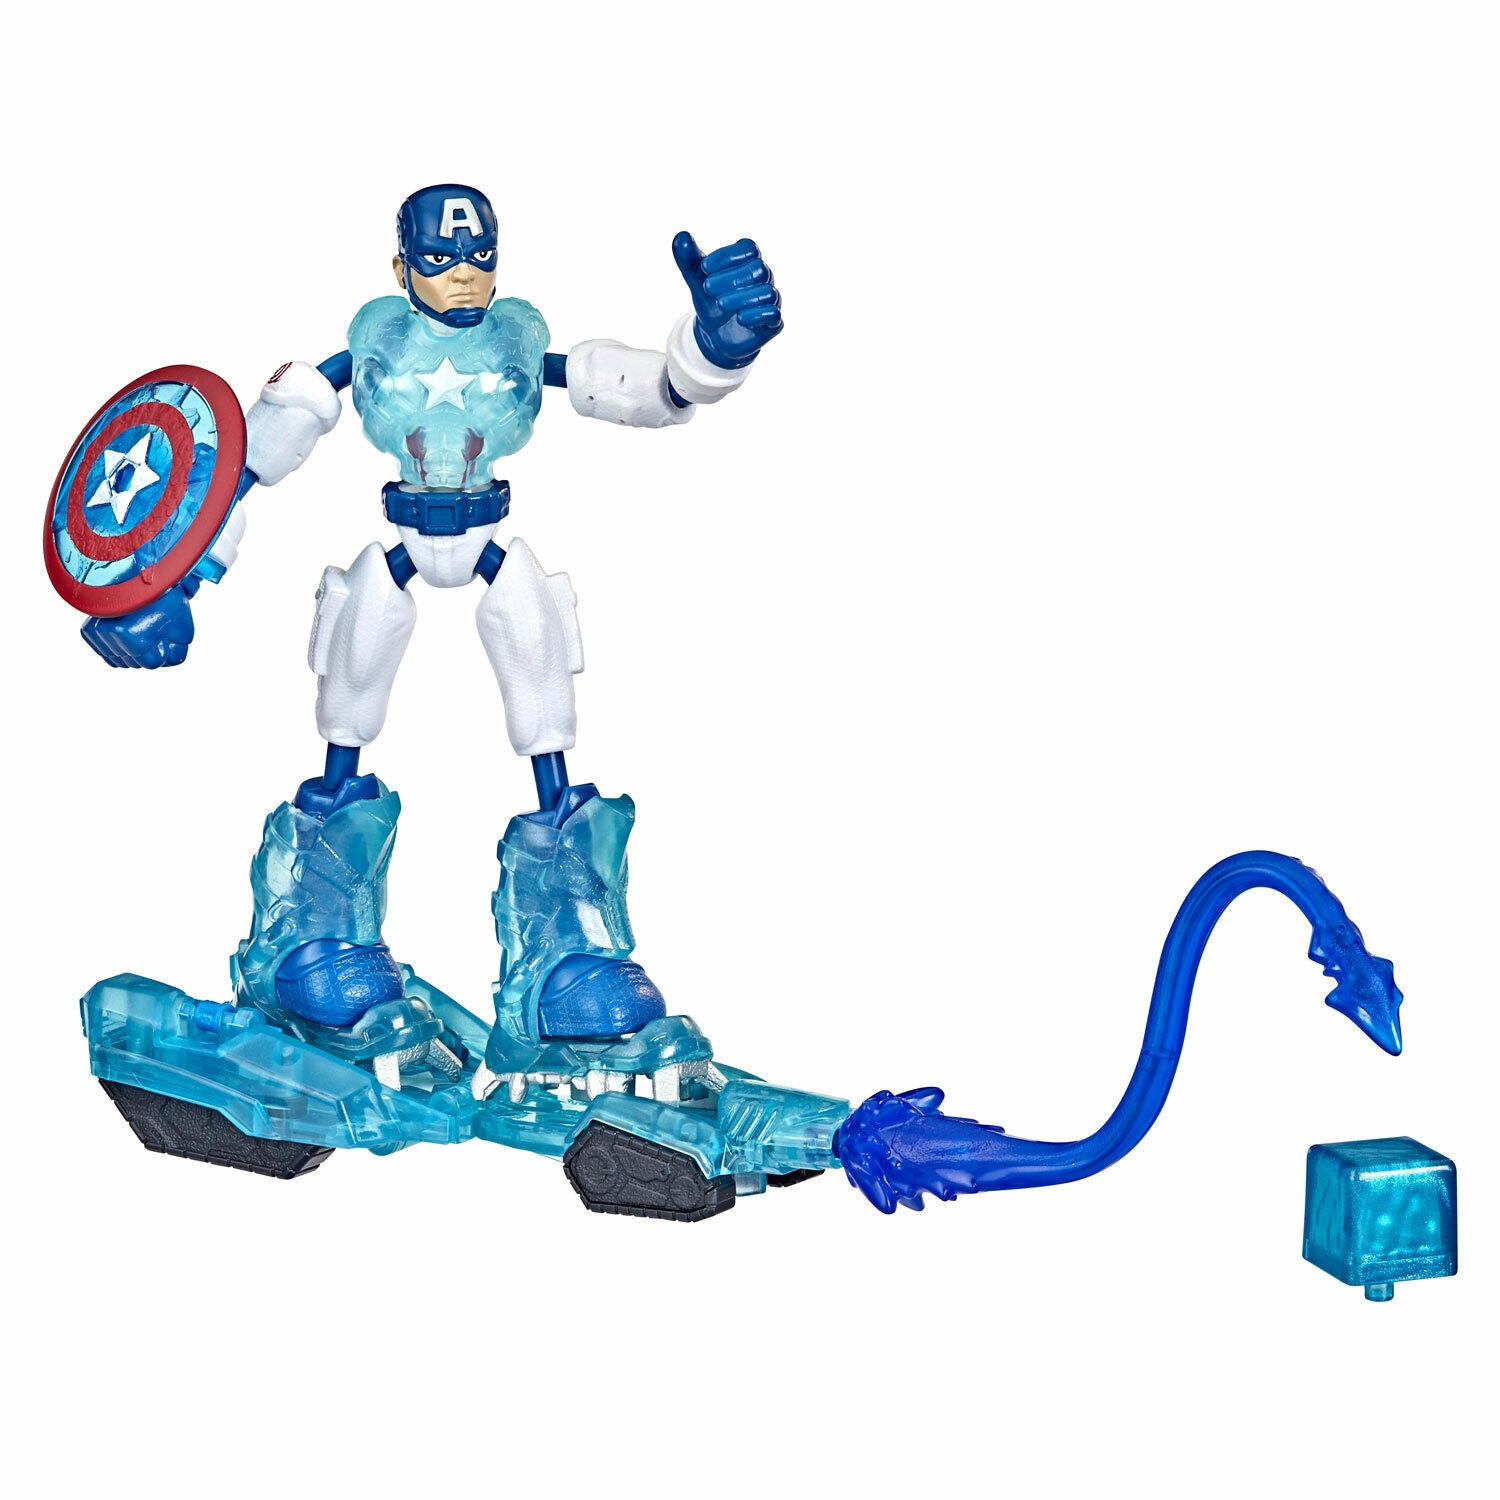 New Marvel Avengers Bend and Flex Captain America Ice Mission Figure 6-Inch